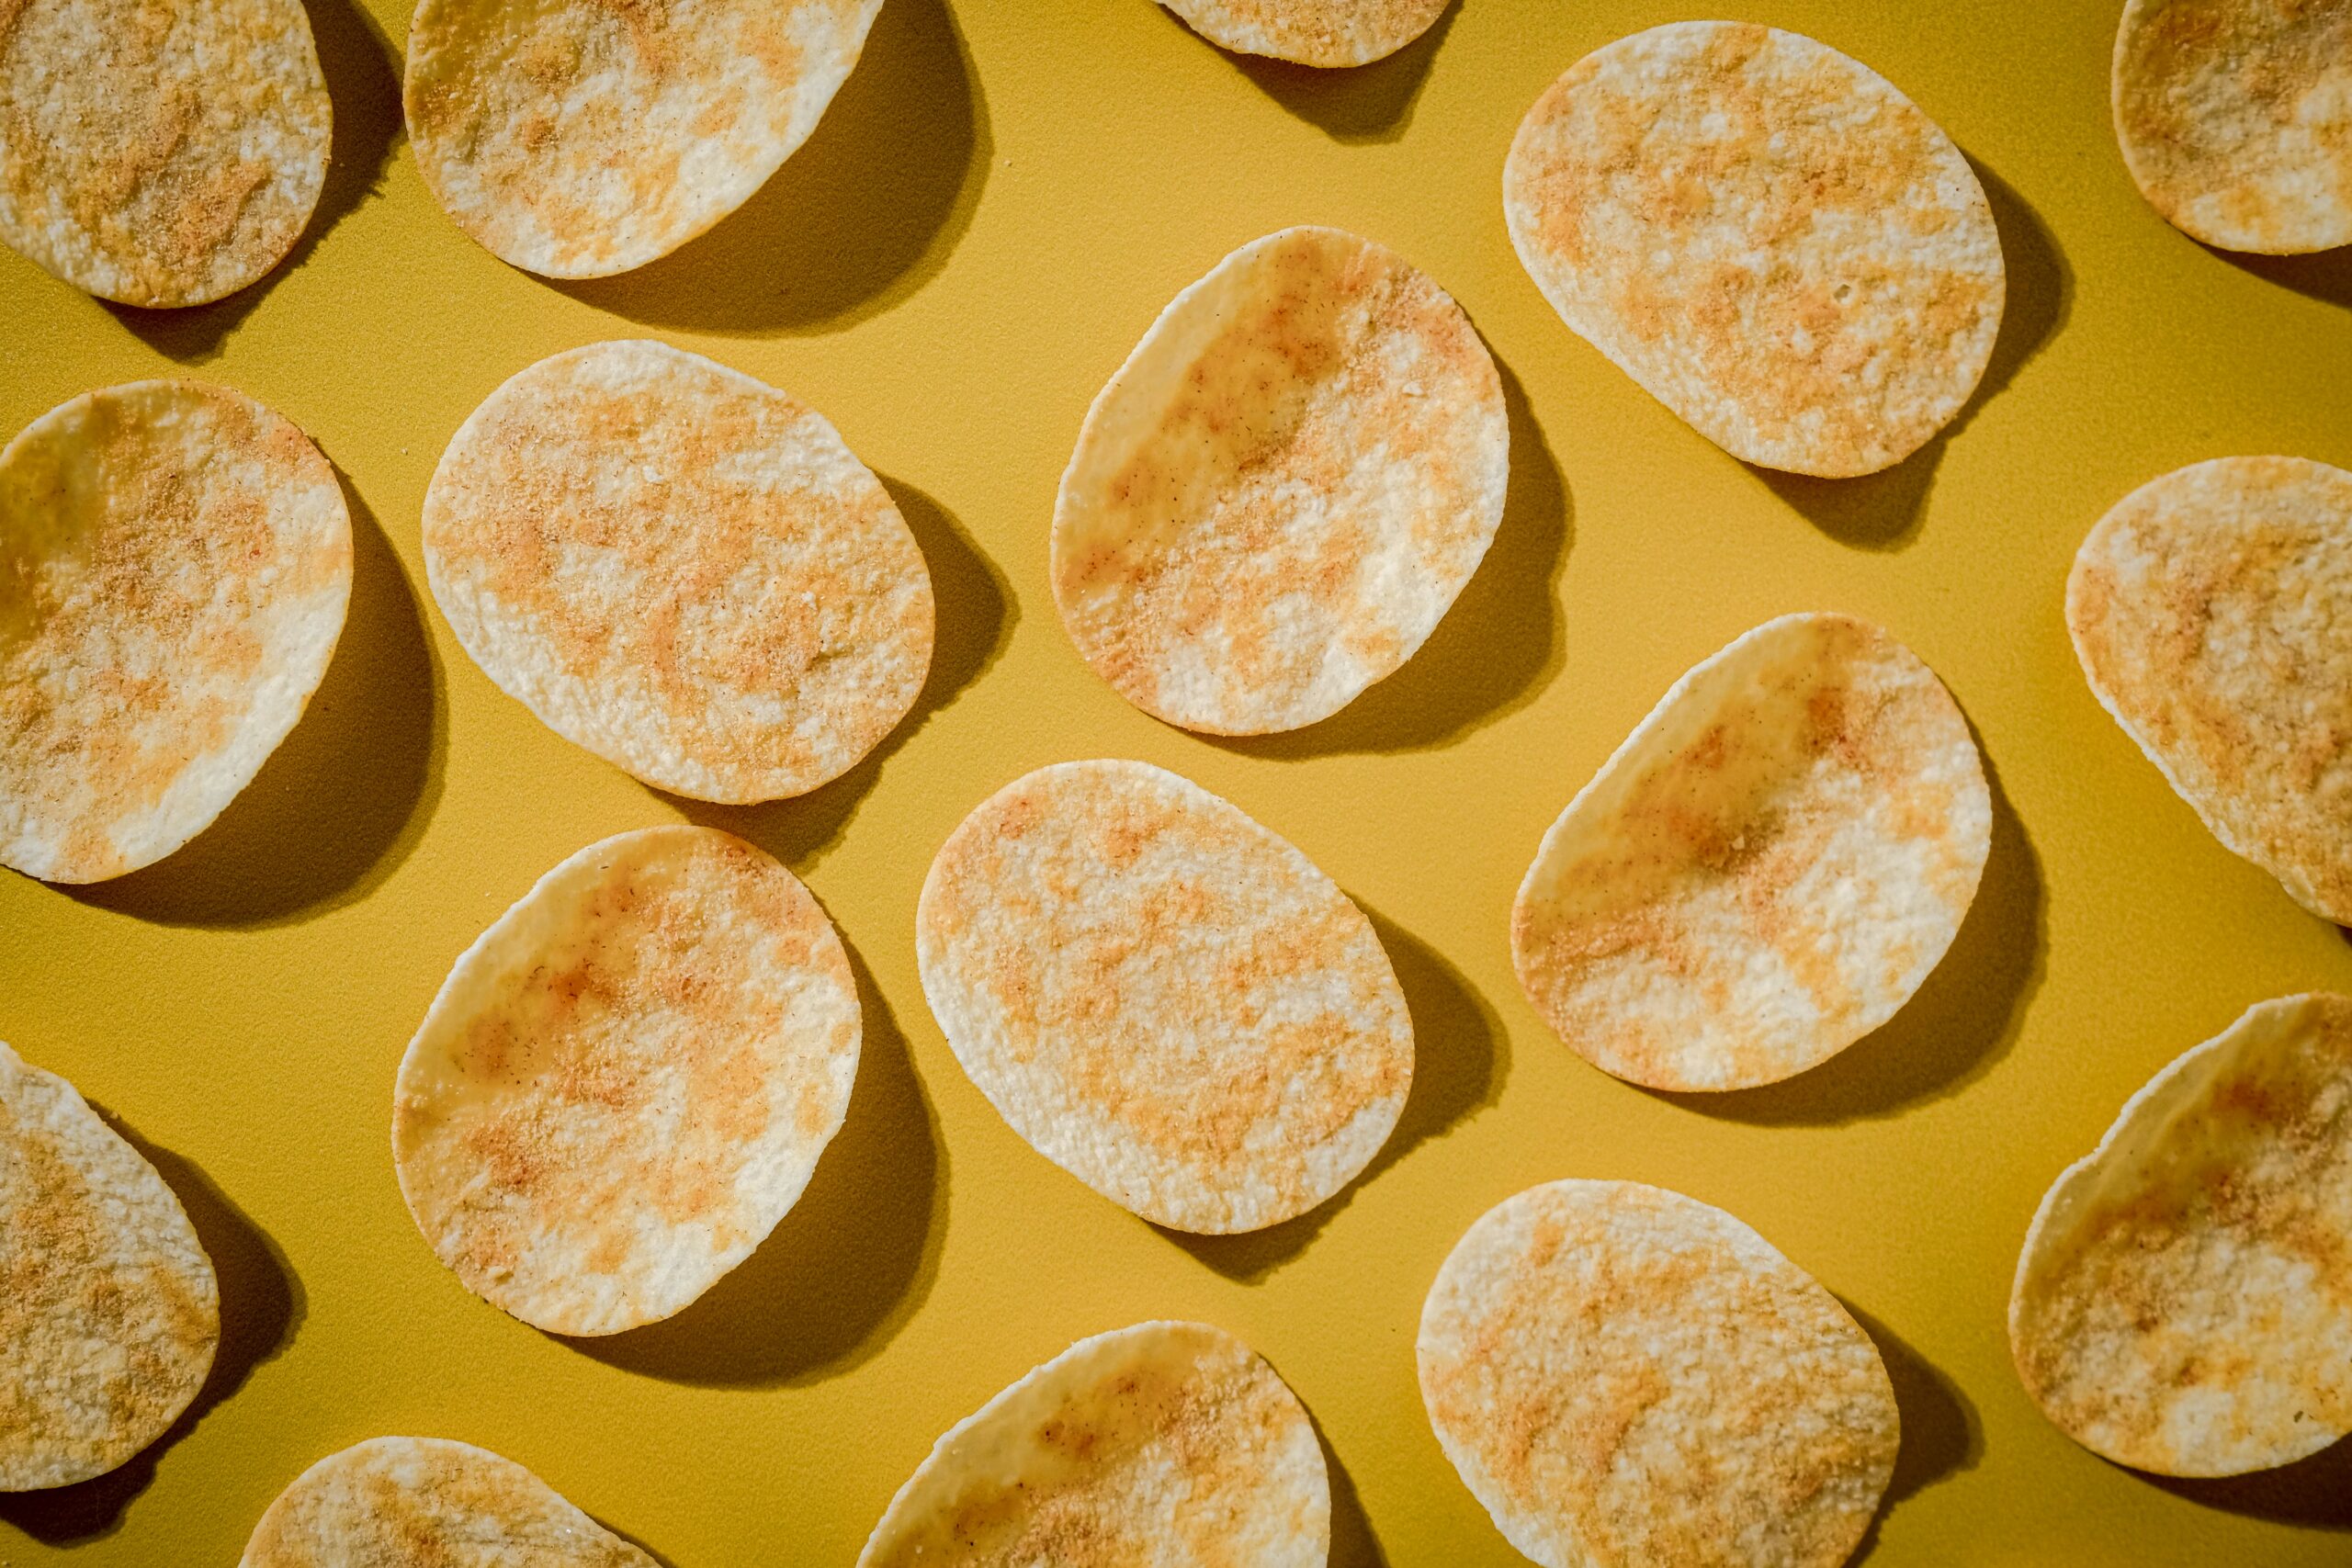 An array of artificially flavored potato chips on a yellow background.